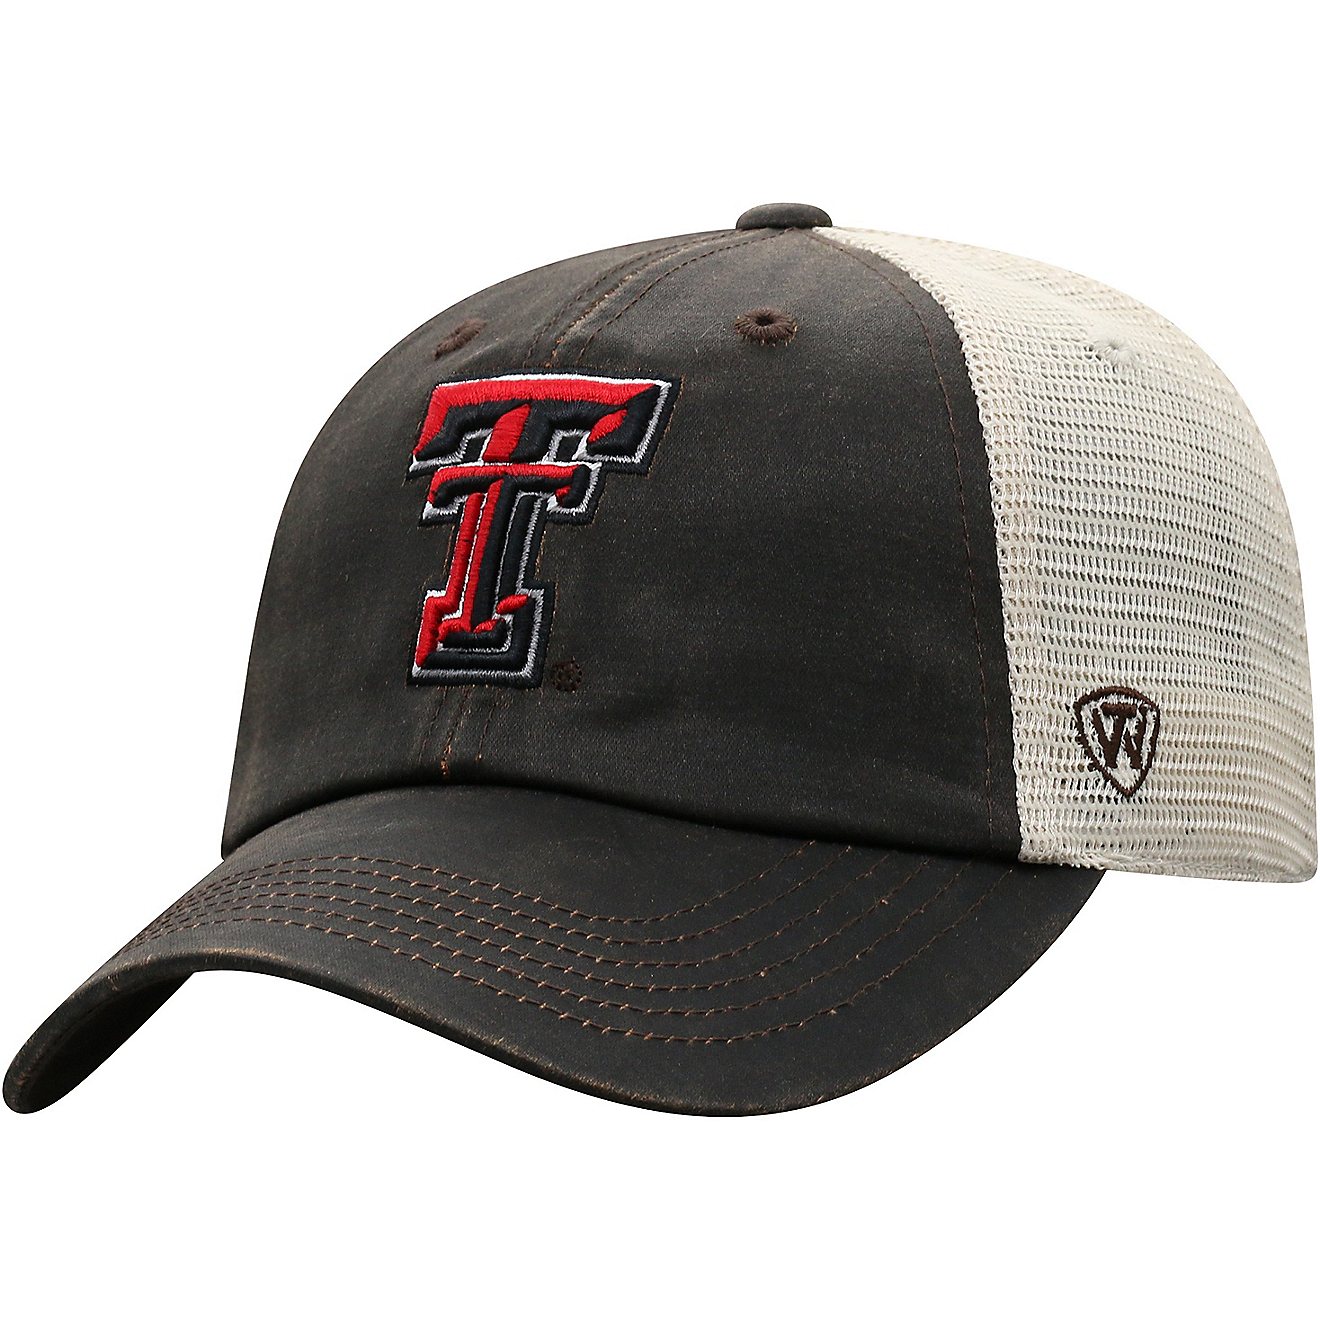 Top of the World Adults' Texas Tech University ScatMesh Cap                                                                      - view number 1